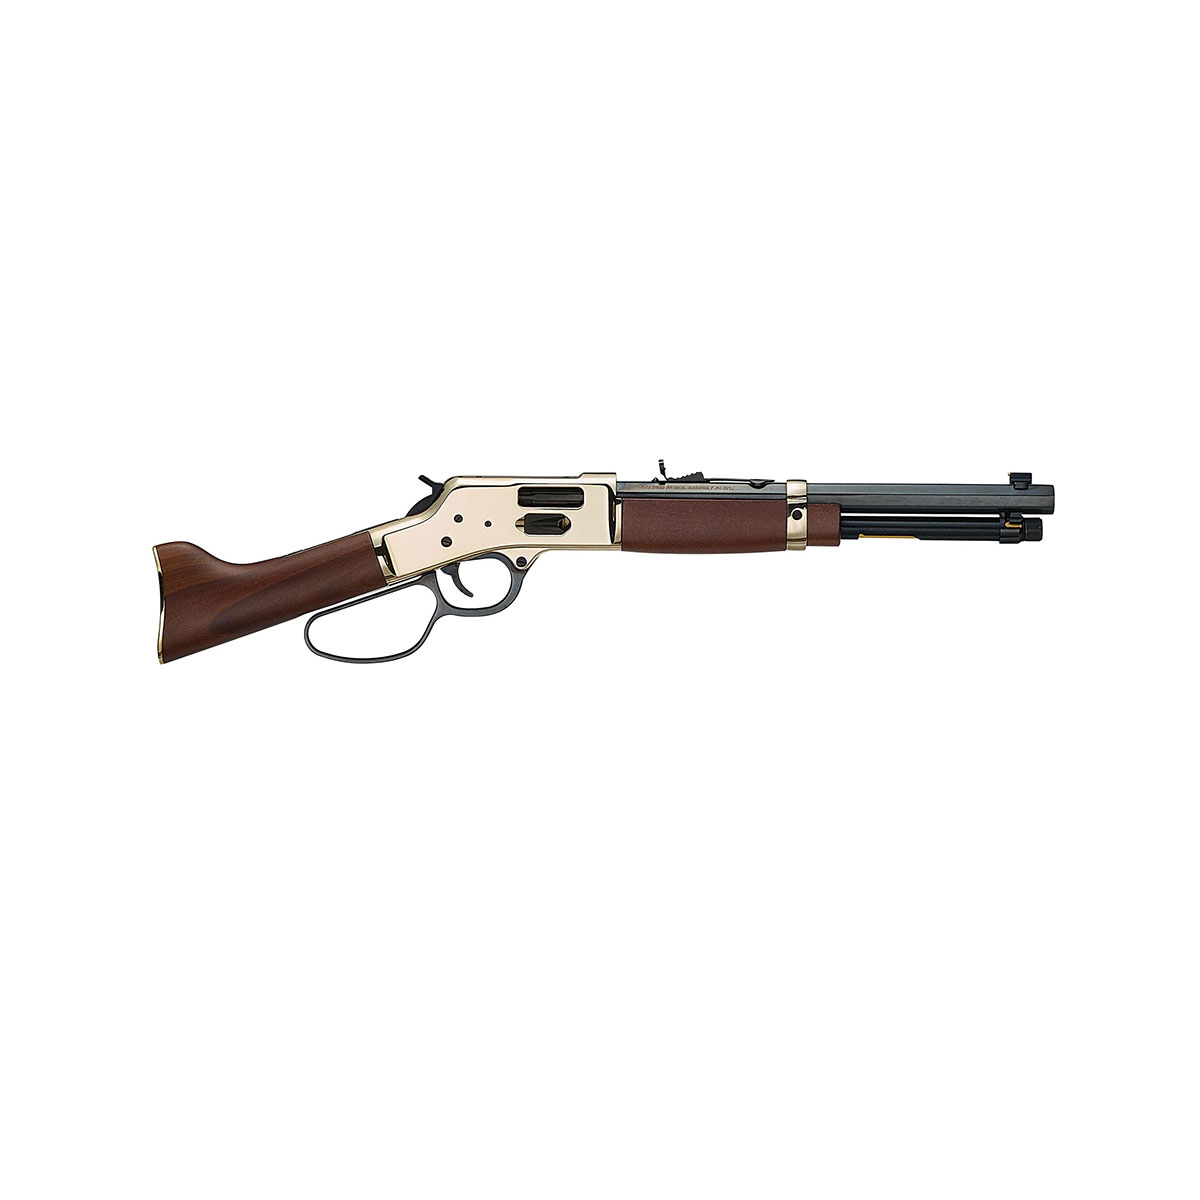 HENRY REPEATING ARMS - BIG BOY MARE'S LEG 357 MAGNUM/38 SPECIAL LEVER ACTION HANDGUN